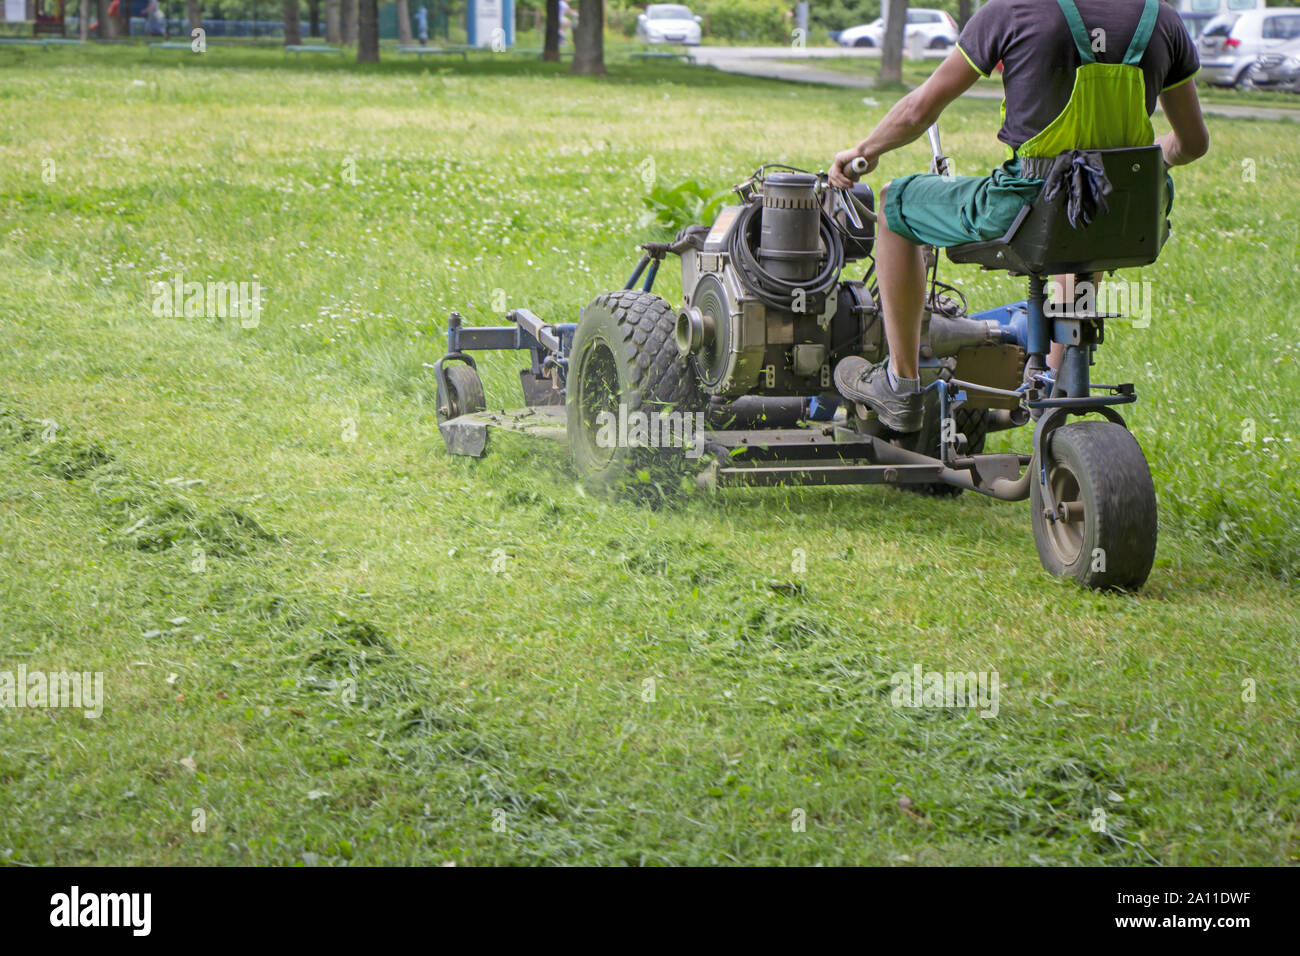 Worker mowing grass in a city park. Stock Photo